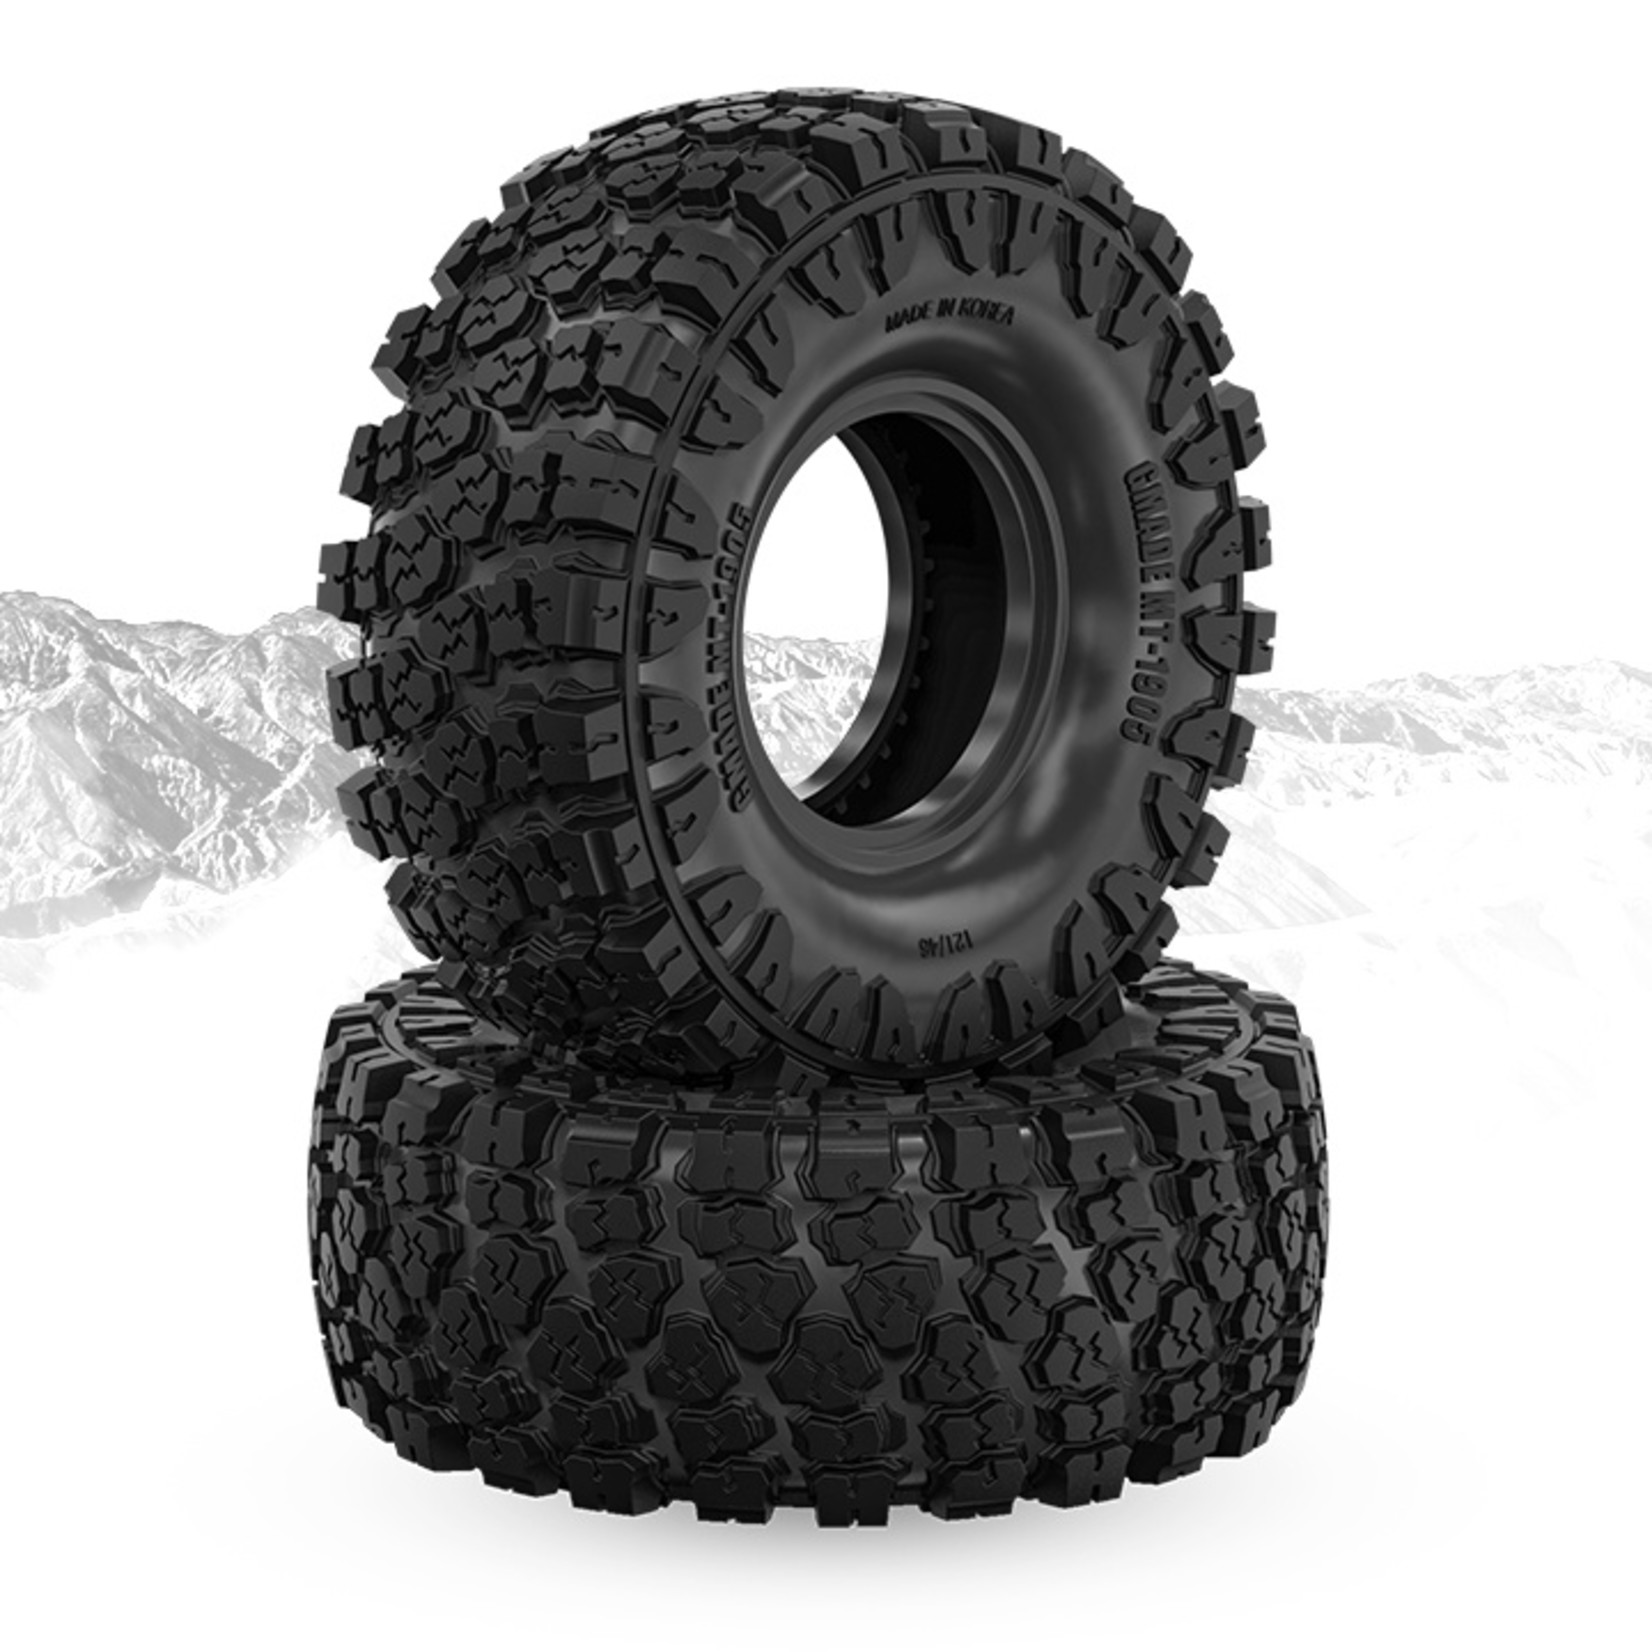 Gmade 1.9 MT 1905 Off-road Tires (2)